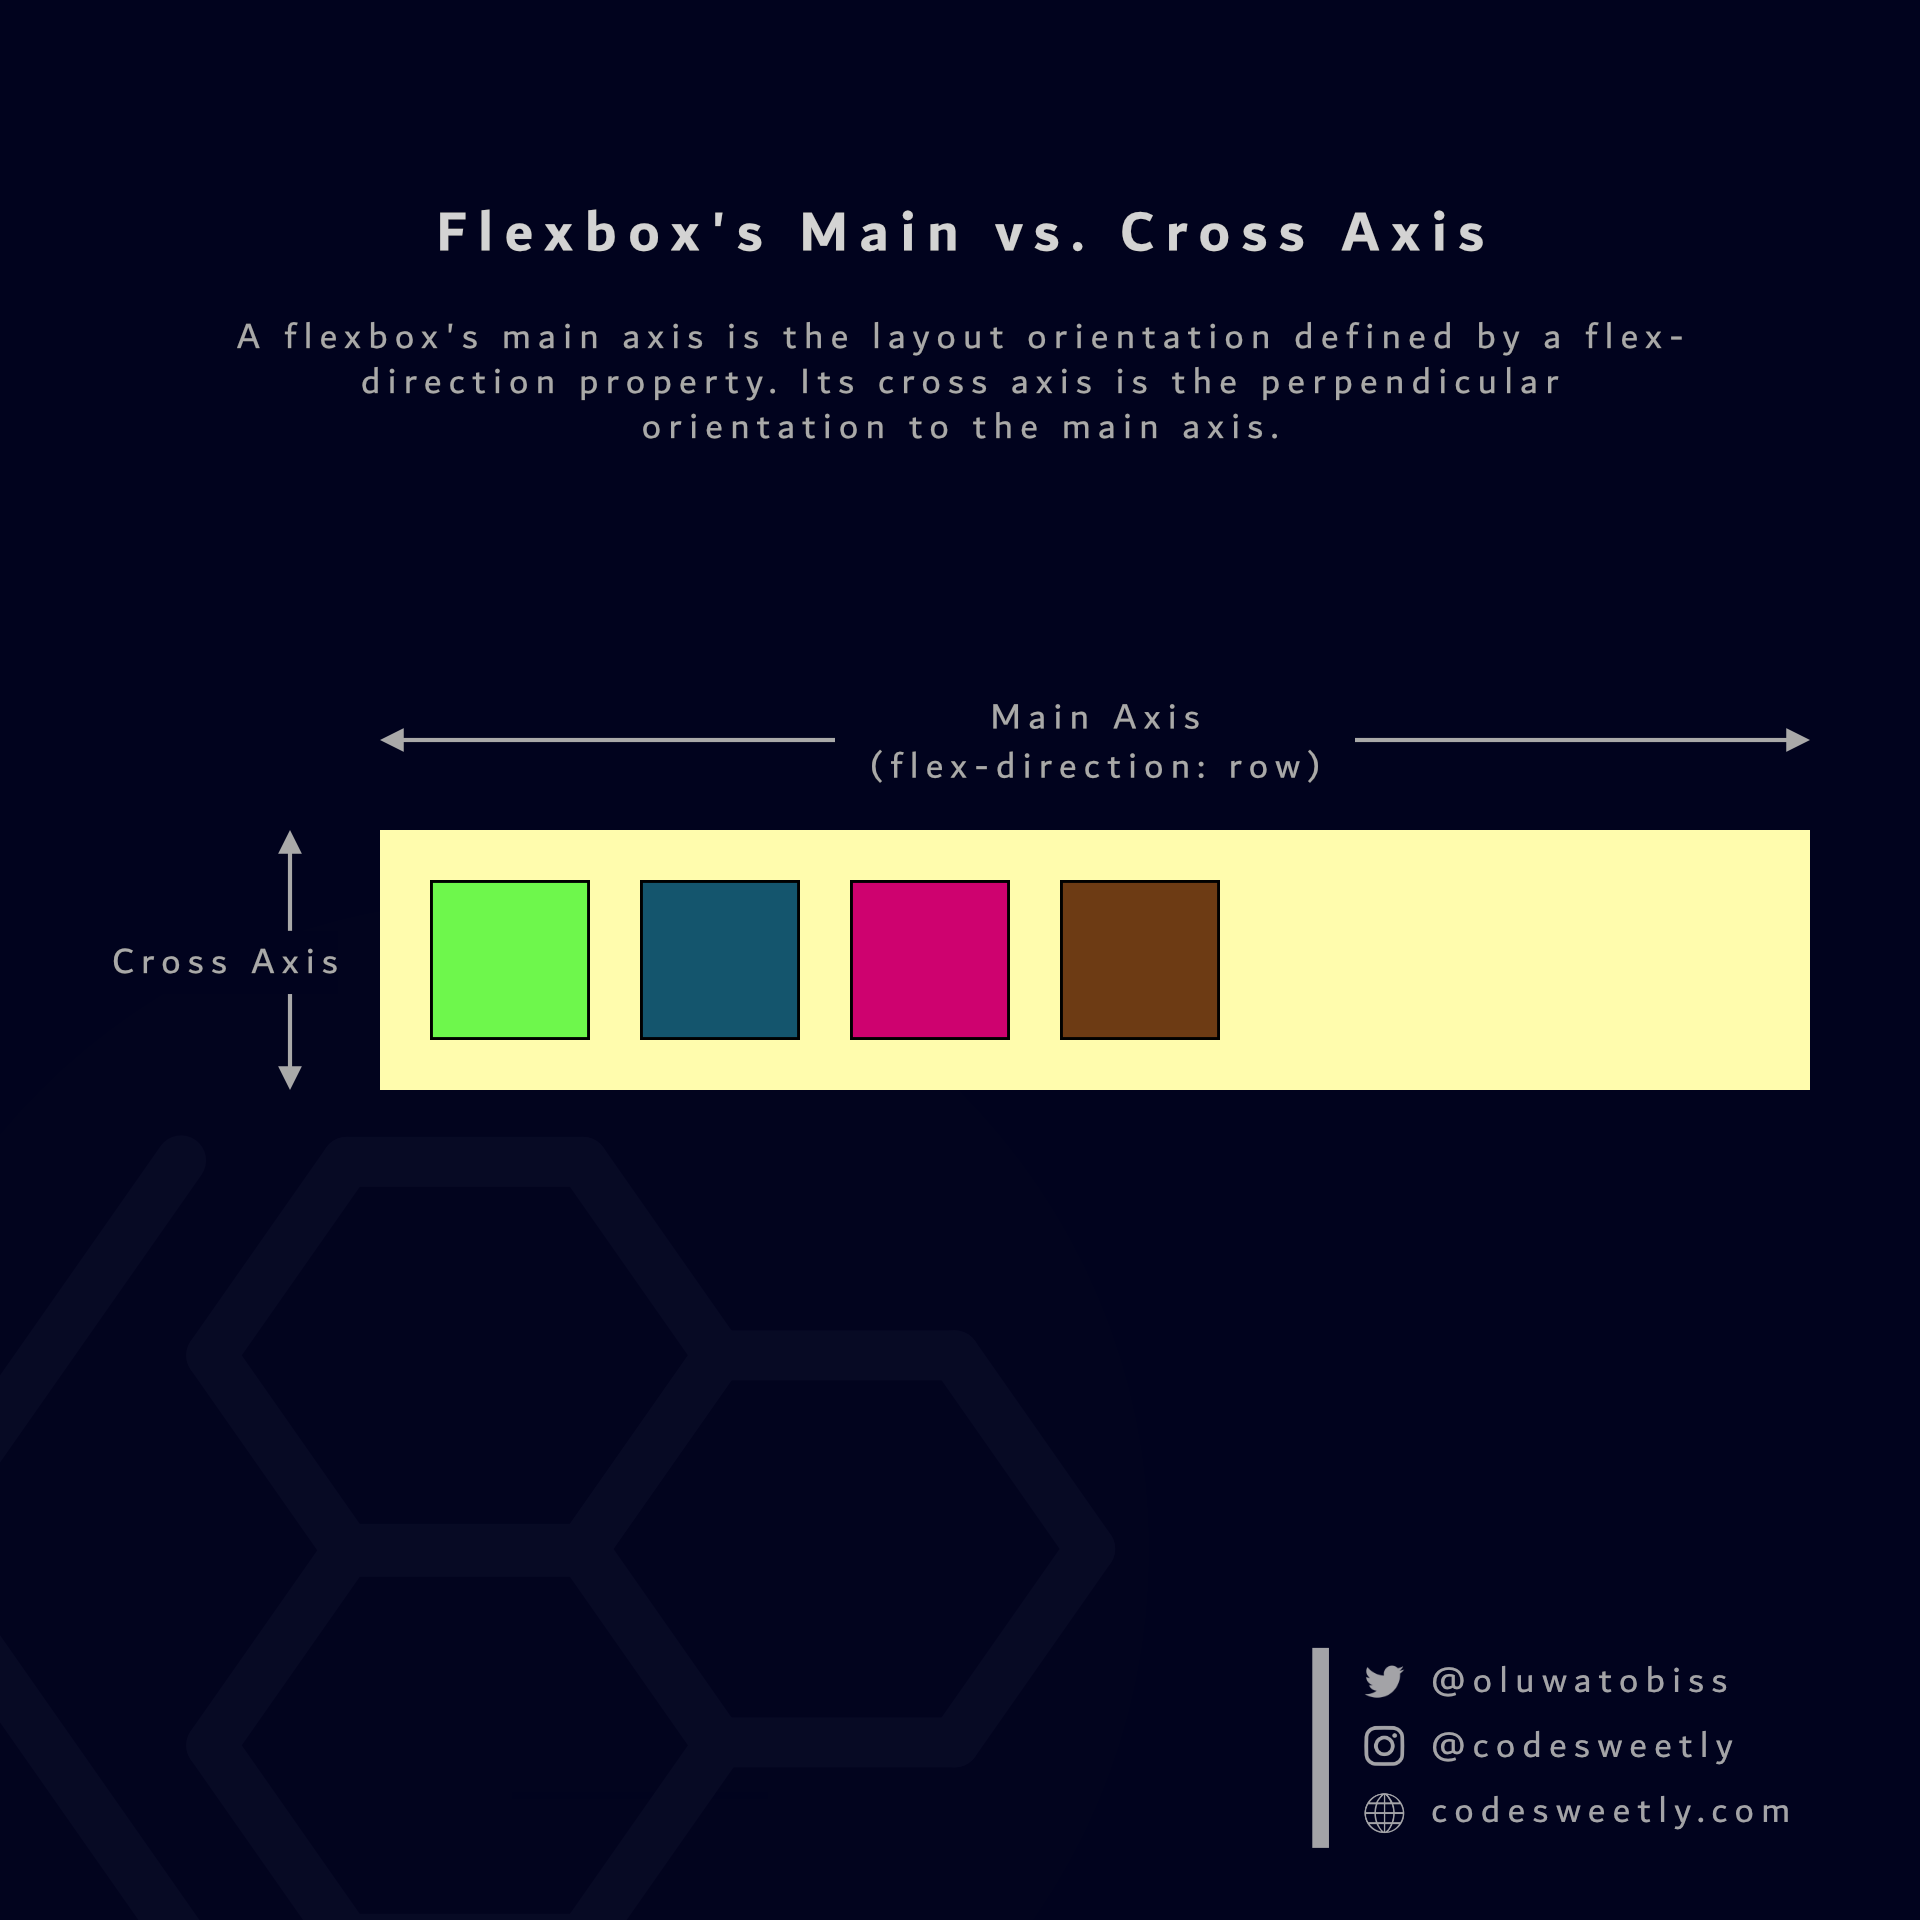 Illustration of a flexbox's main and cross-axis